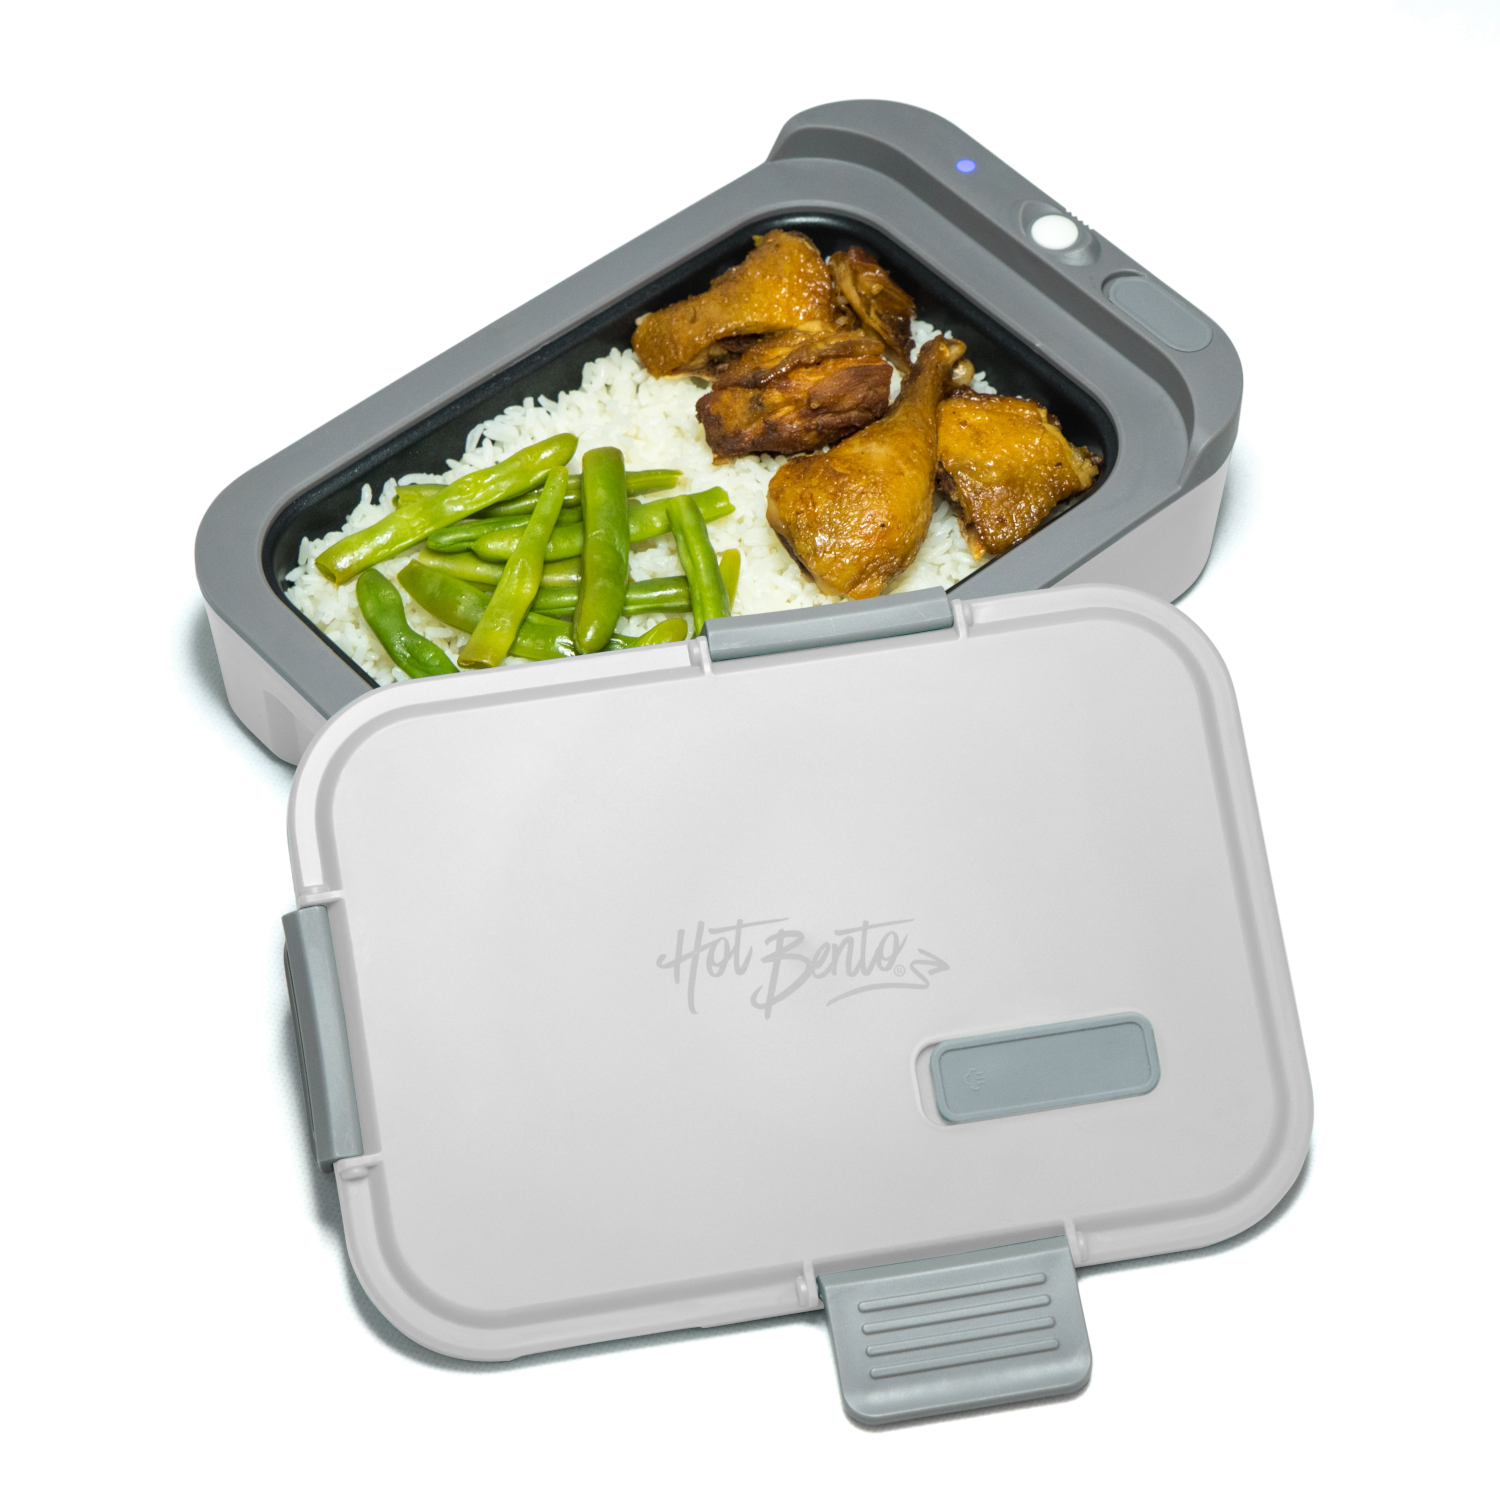 Hot Bento – Self Heated Lunch Box and Food Warmer – Battery Powered Portable, Cordless